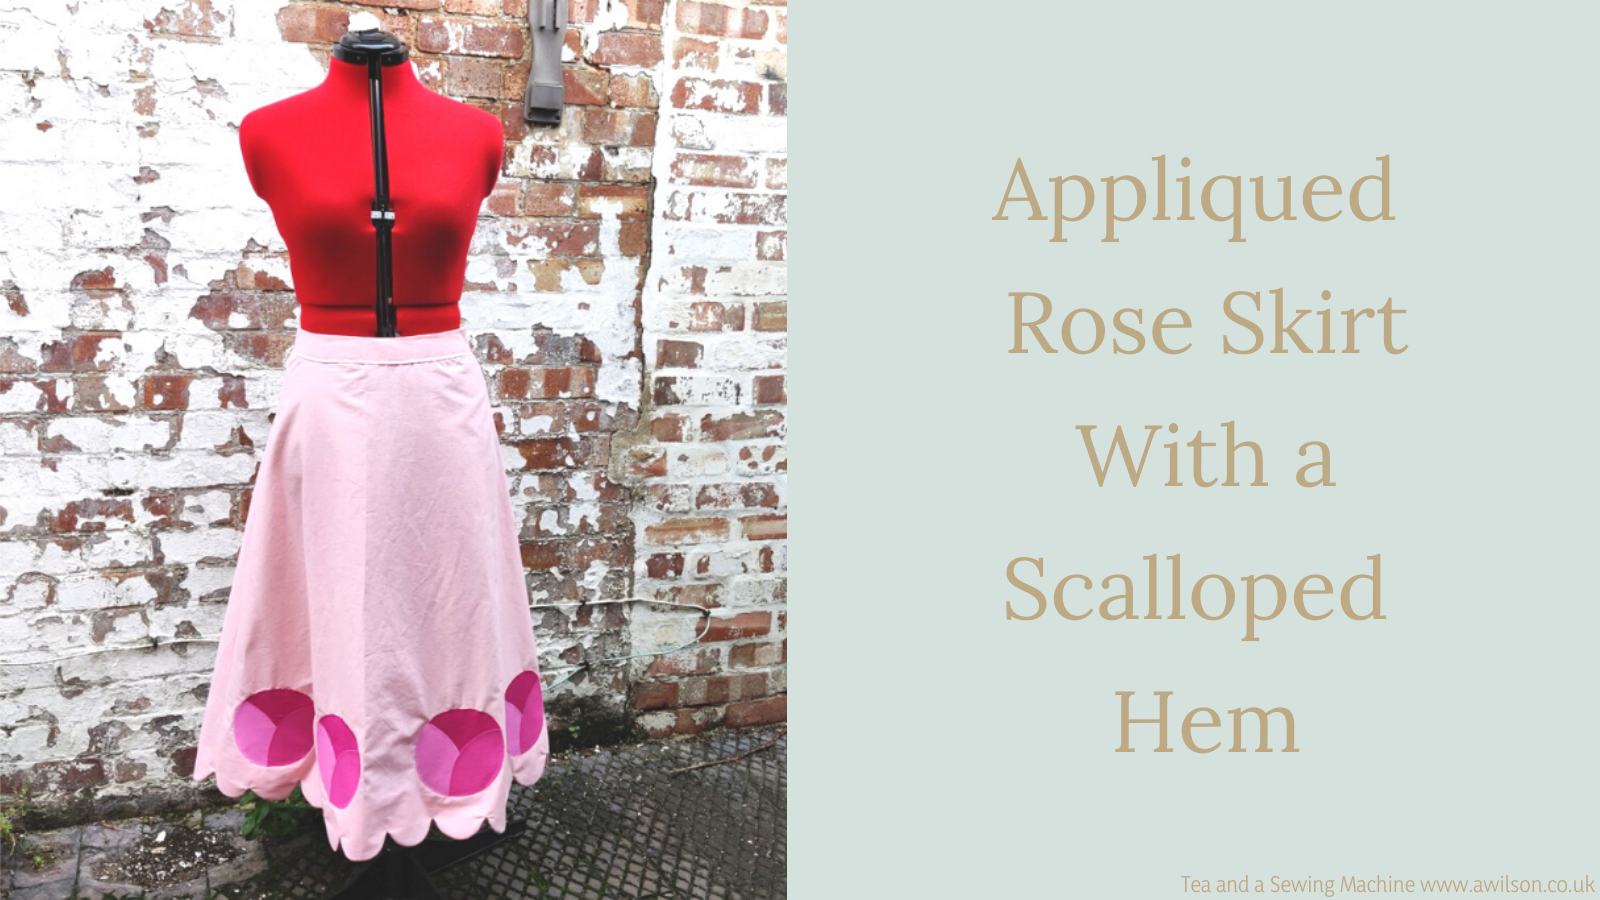 https://www.awilson.co.uk/wp-content/uploads/2021/09/Appliqued-Rose-Skirt-With-a-Scalloped-Hem.png